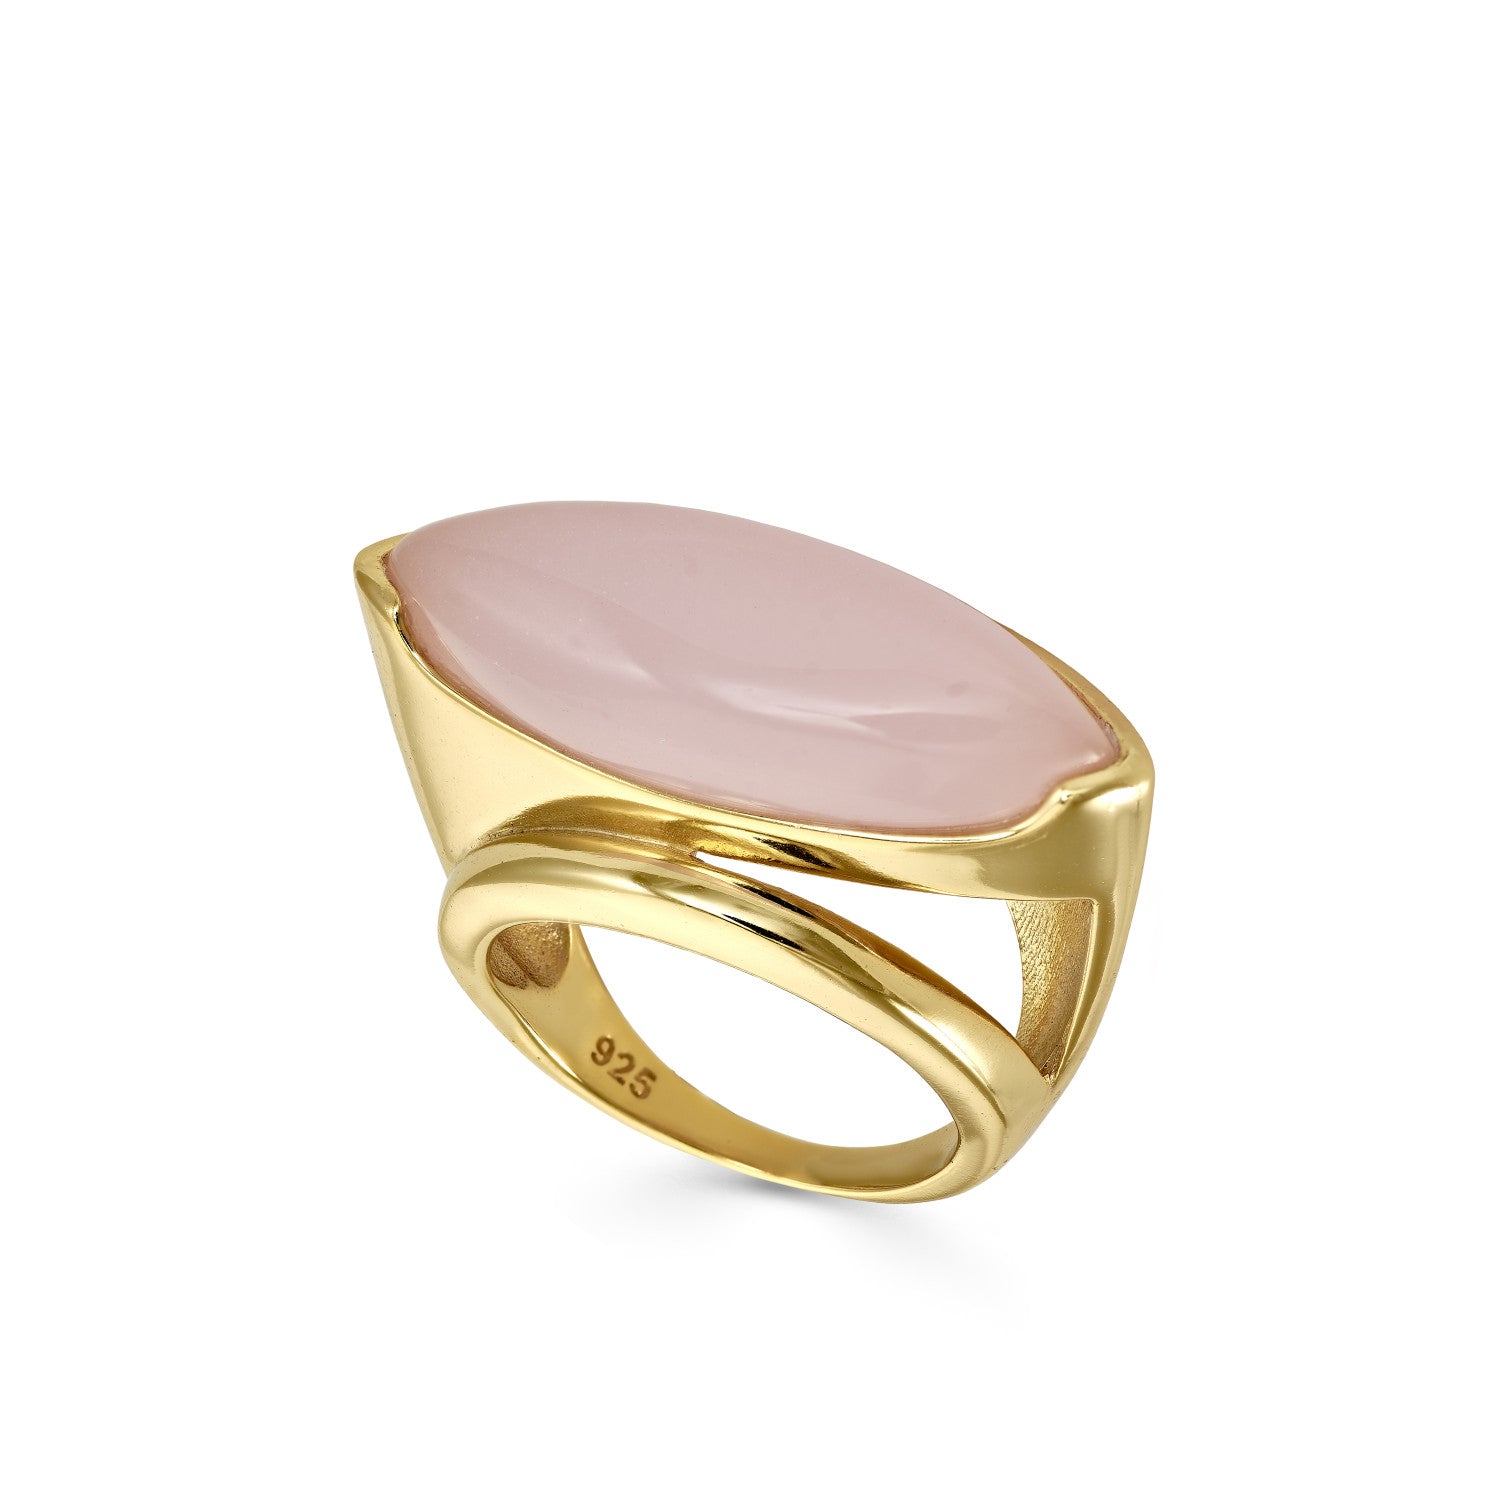 Rings with rose quartz tone stones in gold-plated silver